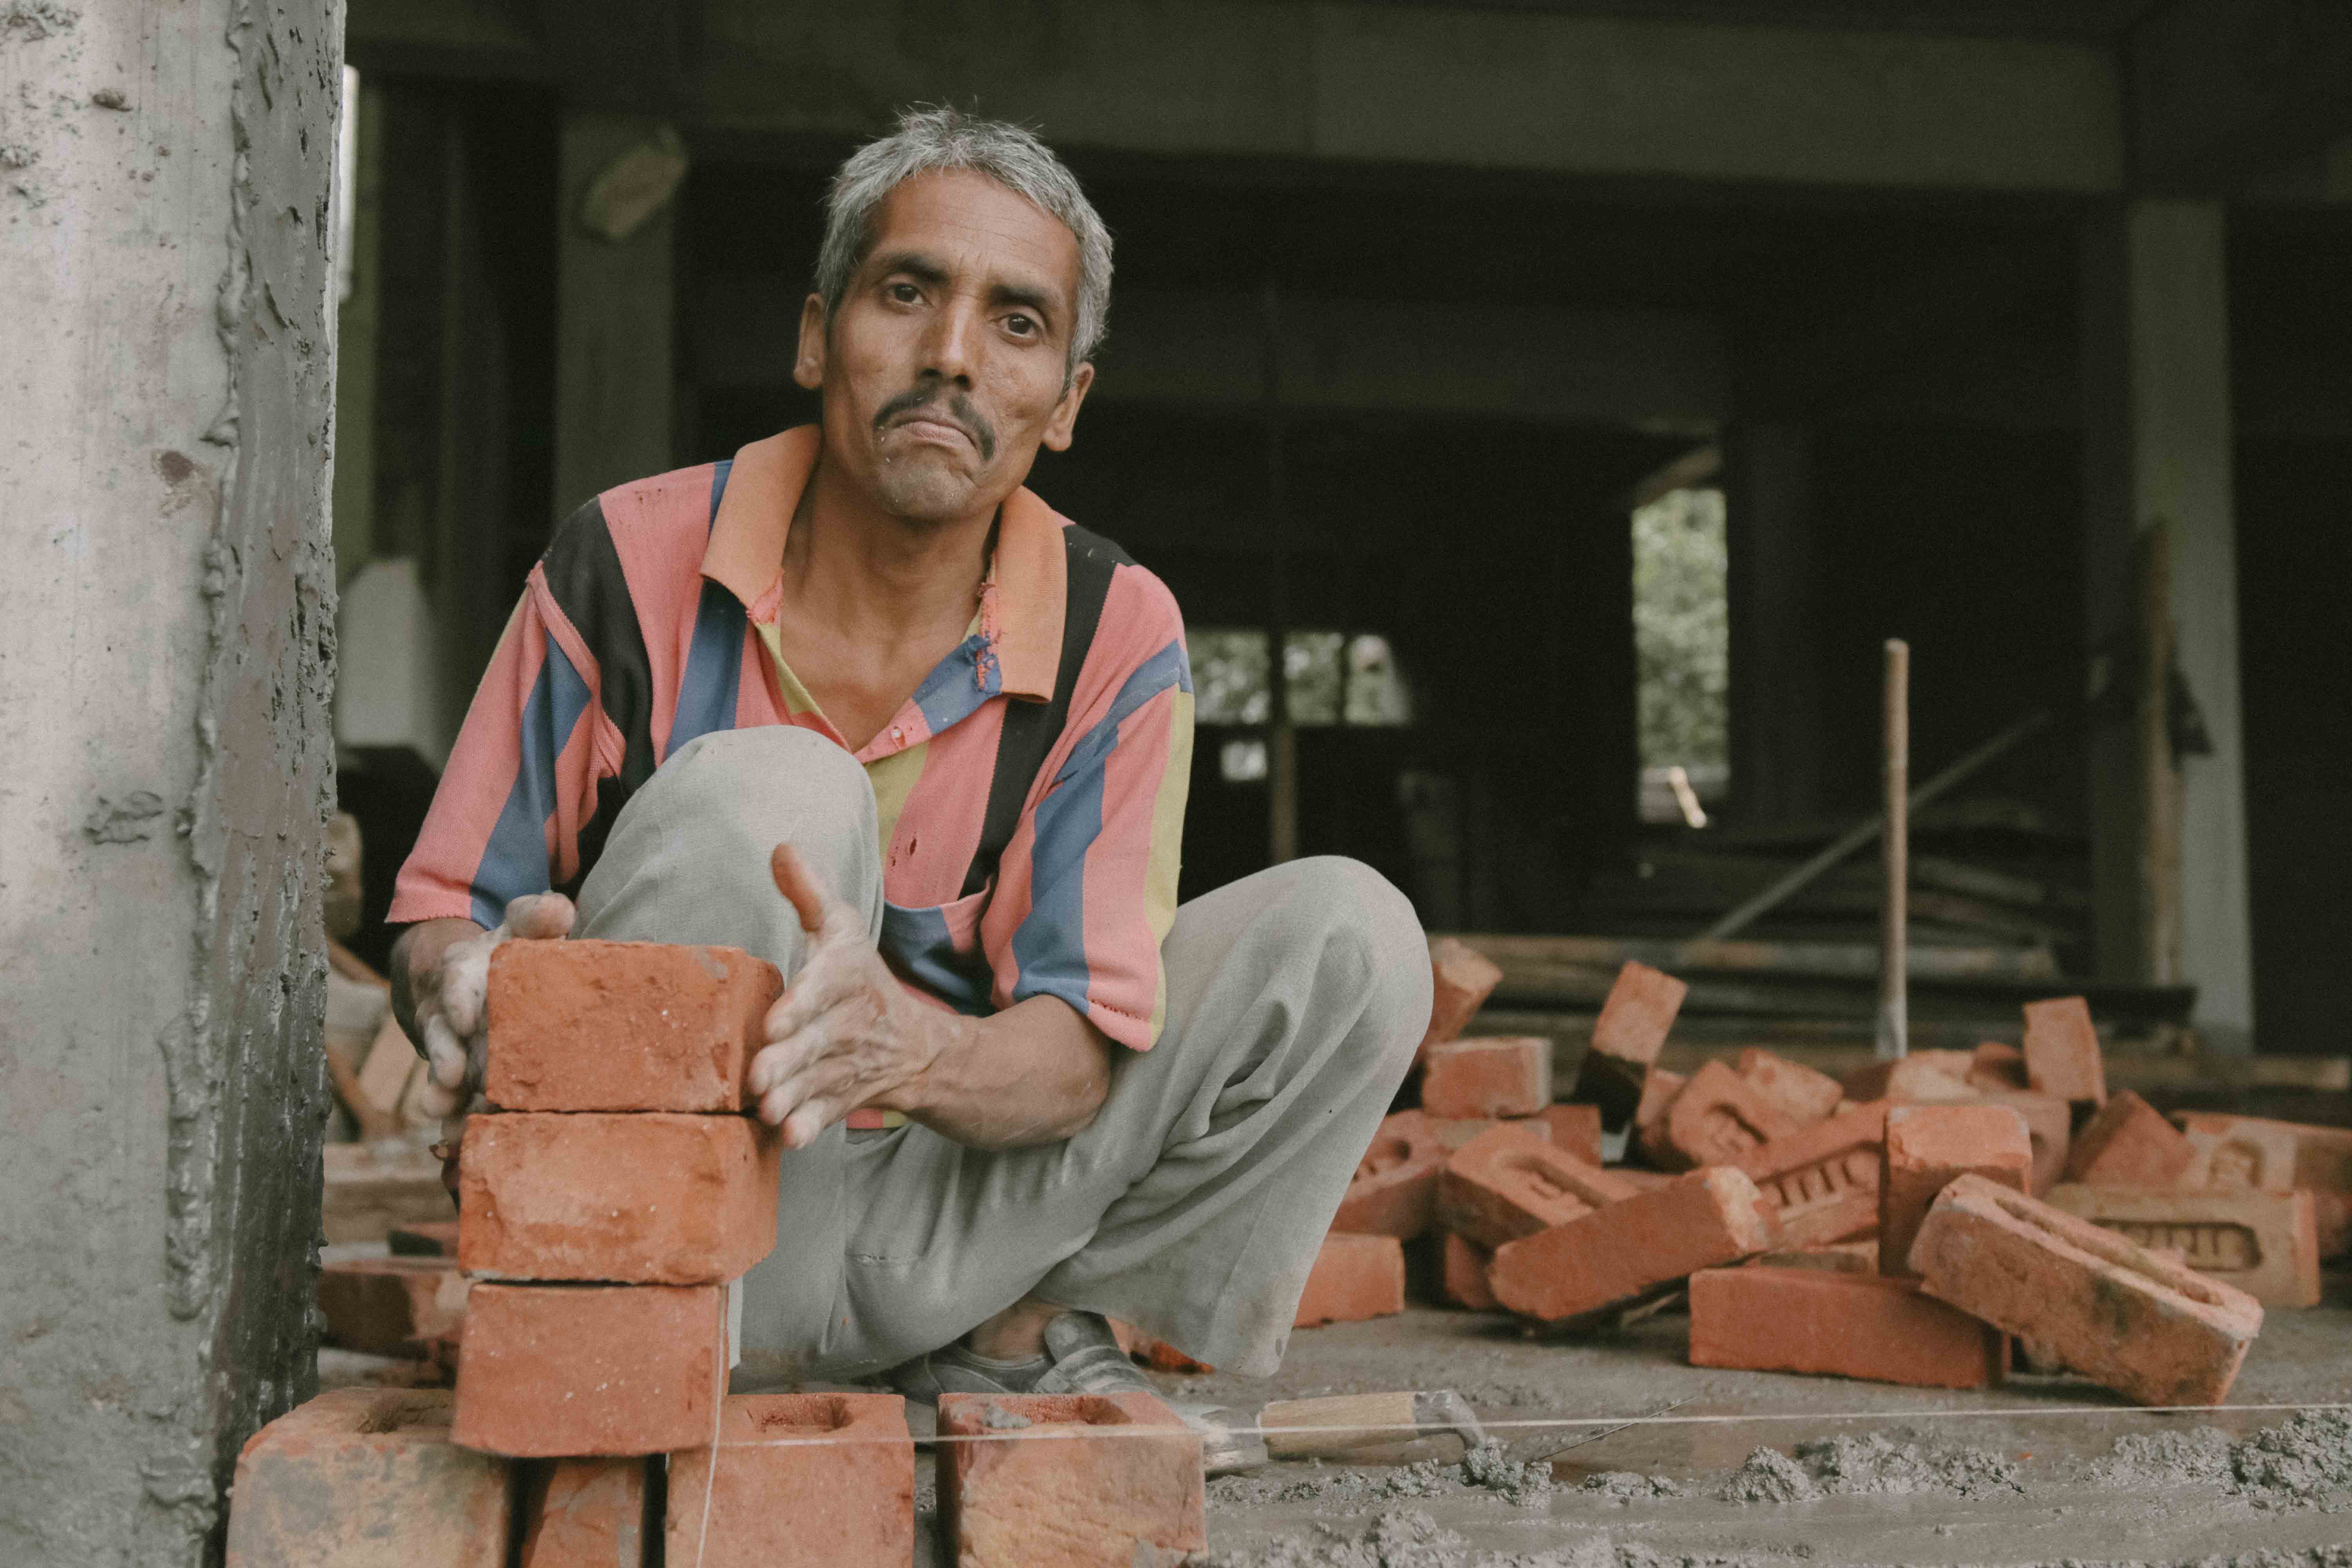 Photo of a man with a stack of bricks in front of him from India.